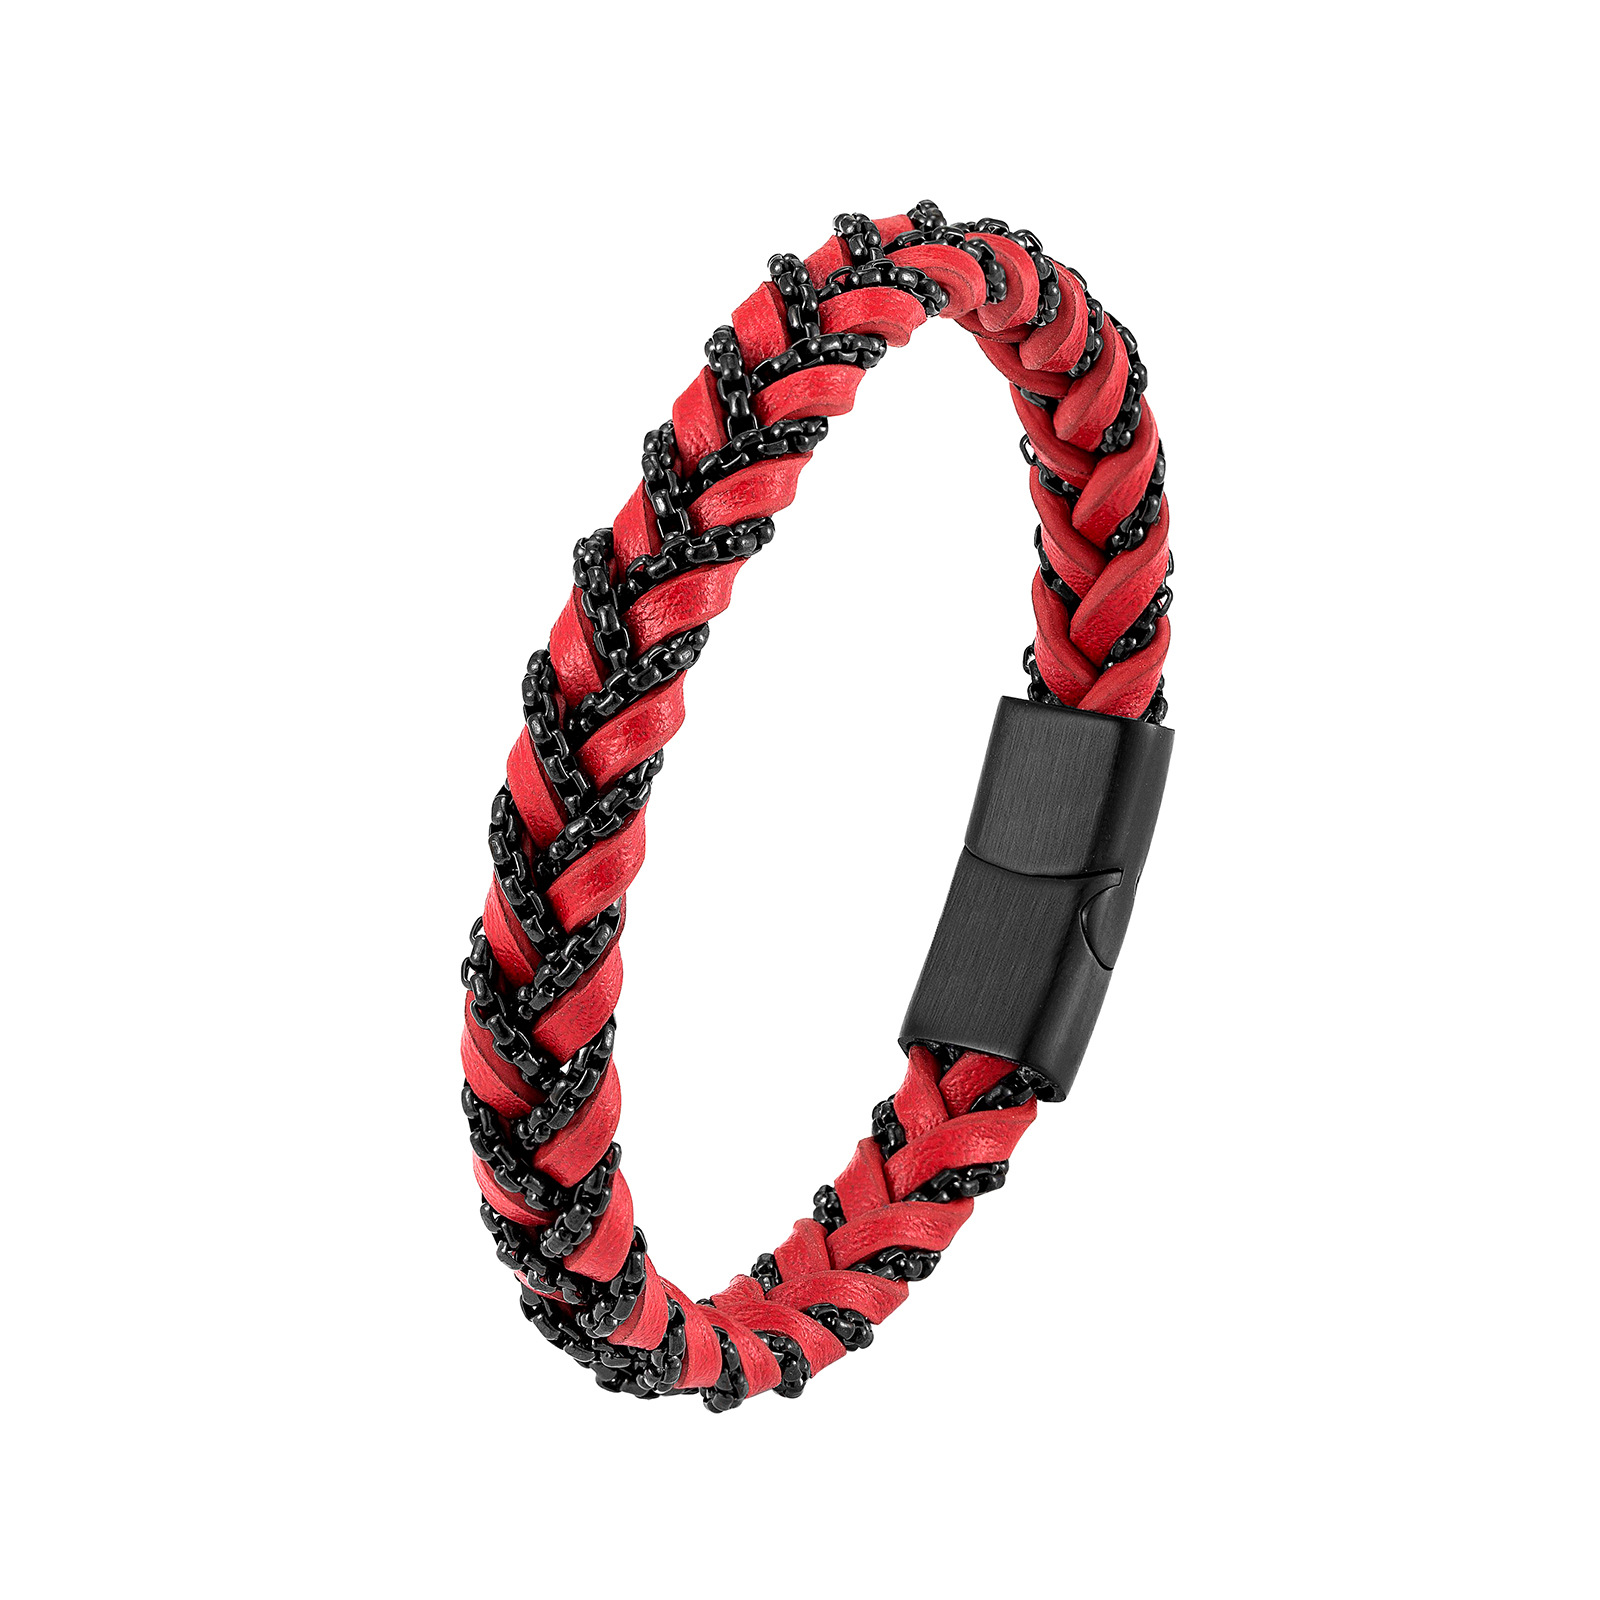 2:Red leather black chain